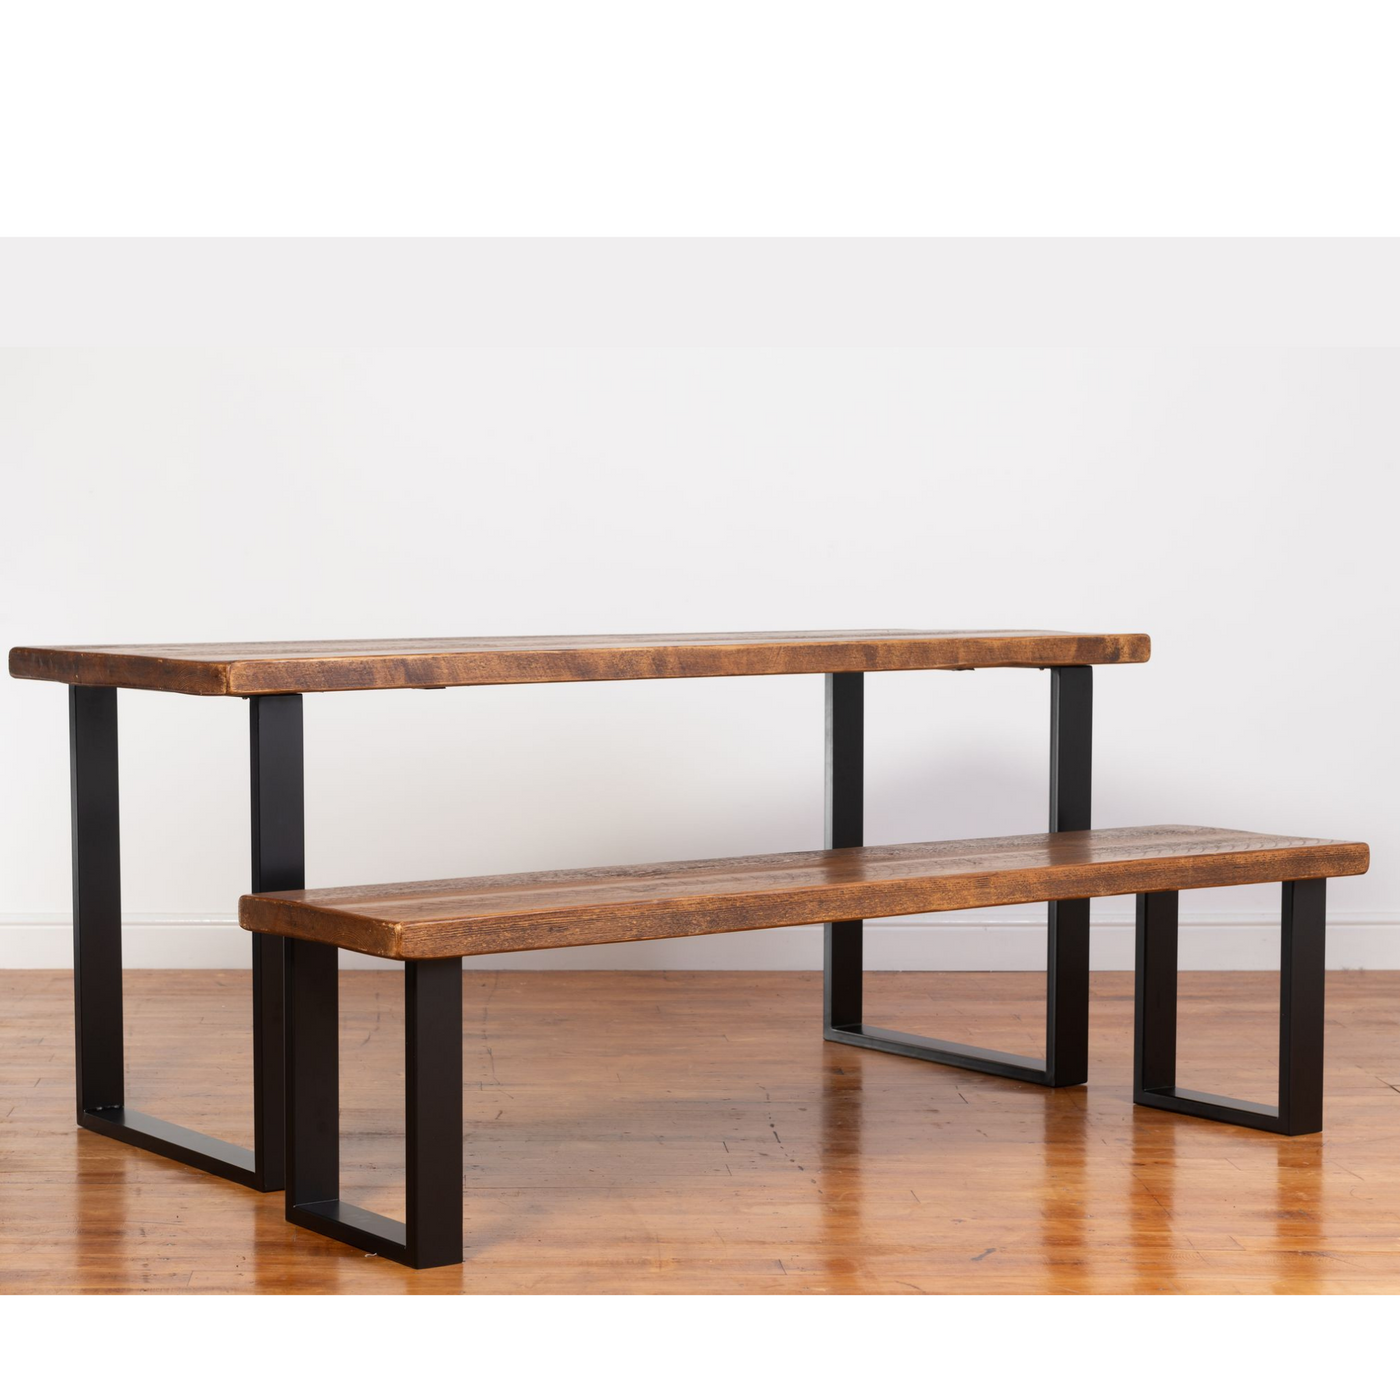 Helvellyn Industrial Bench - Square Legs